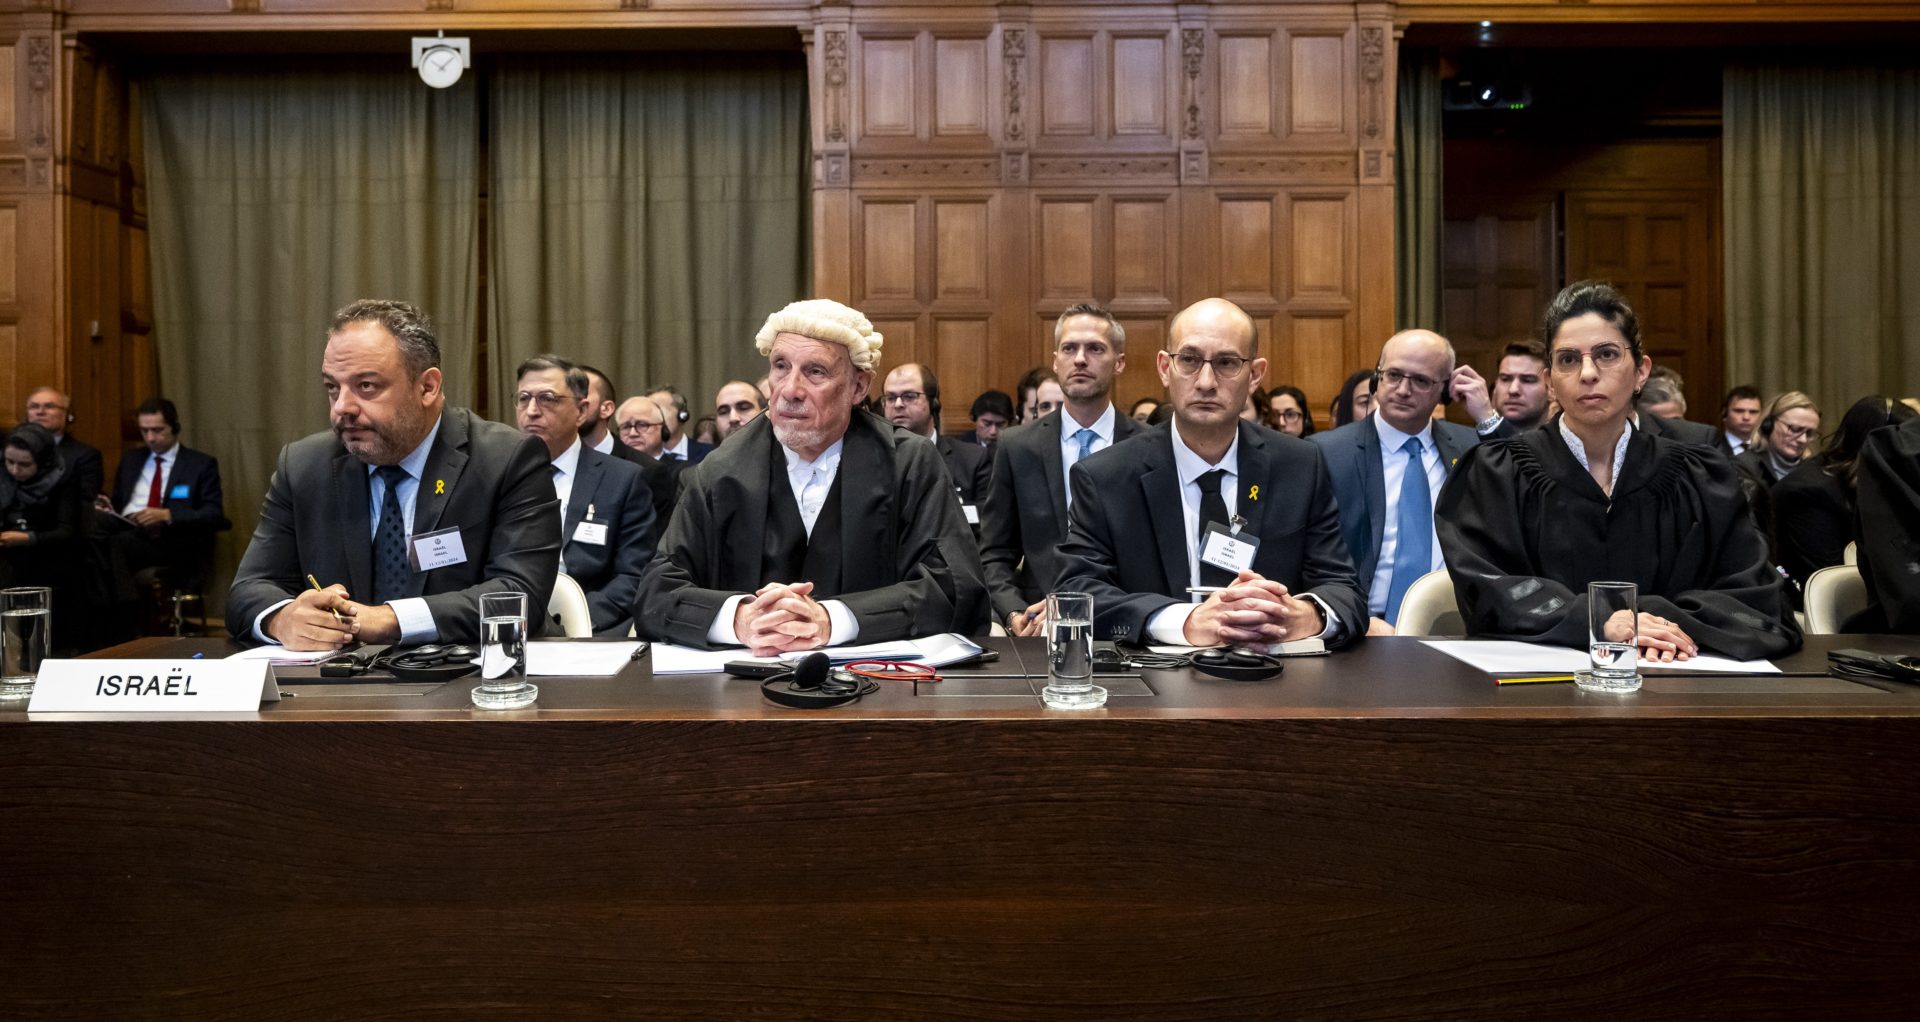 Members of Israel's legal team at the International Court of Justice in The Hague, 11/12-1-24.